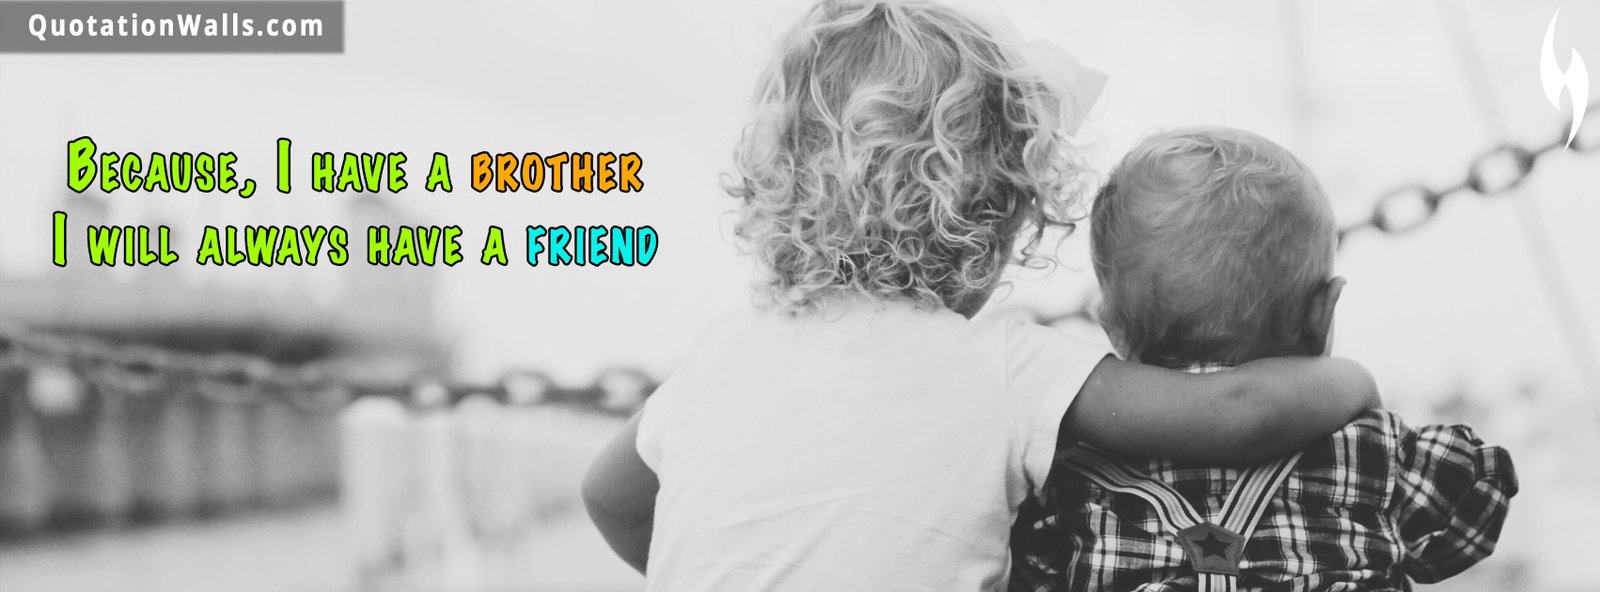 My Brother Is My Friend Motivational Facebook Cover Photo 